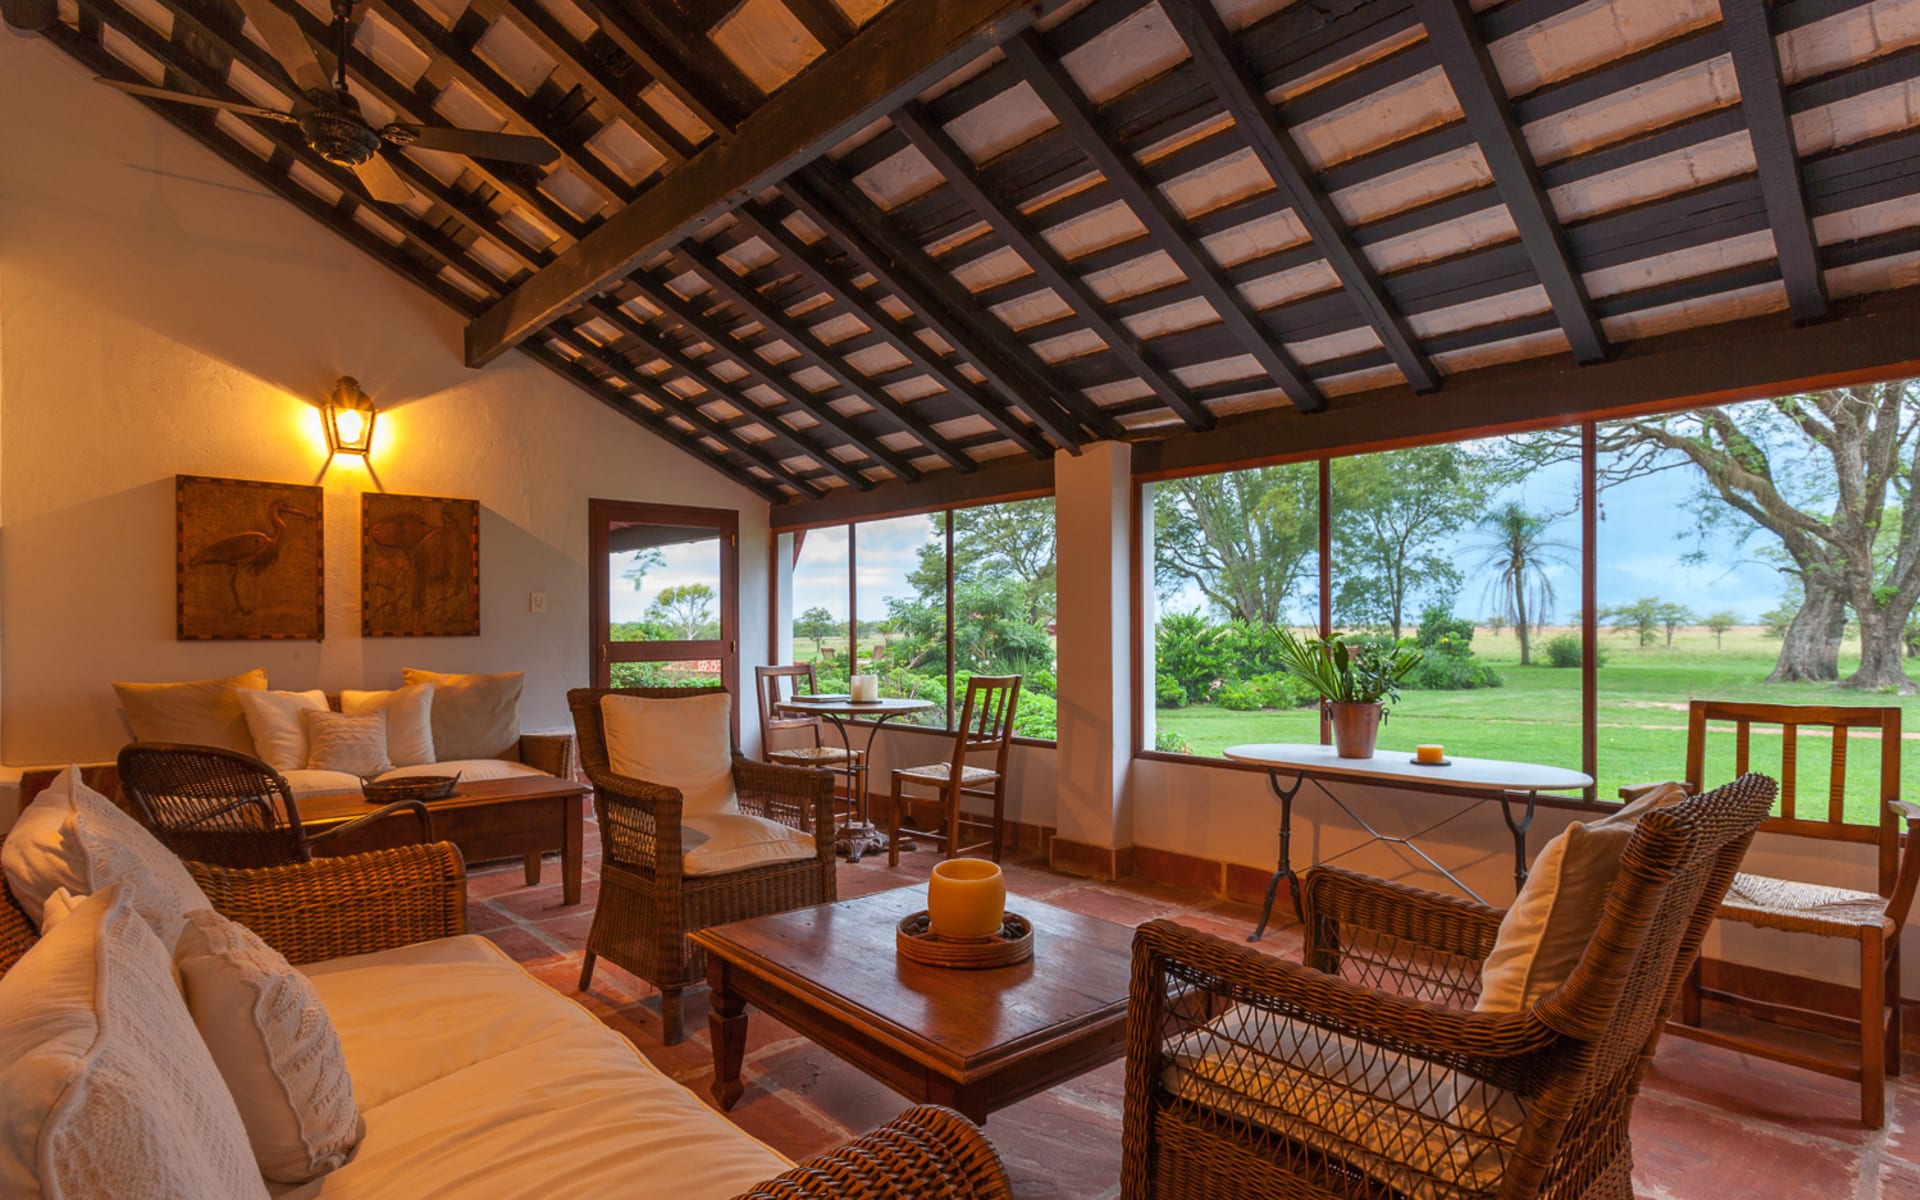 Rincon del Socorro has a seating area that overlooks the gardens, boasts armchairs, coffee tables, and cosy sofas.